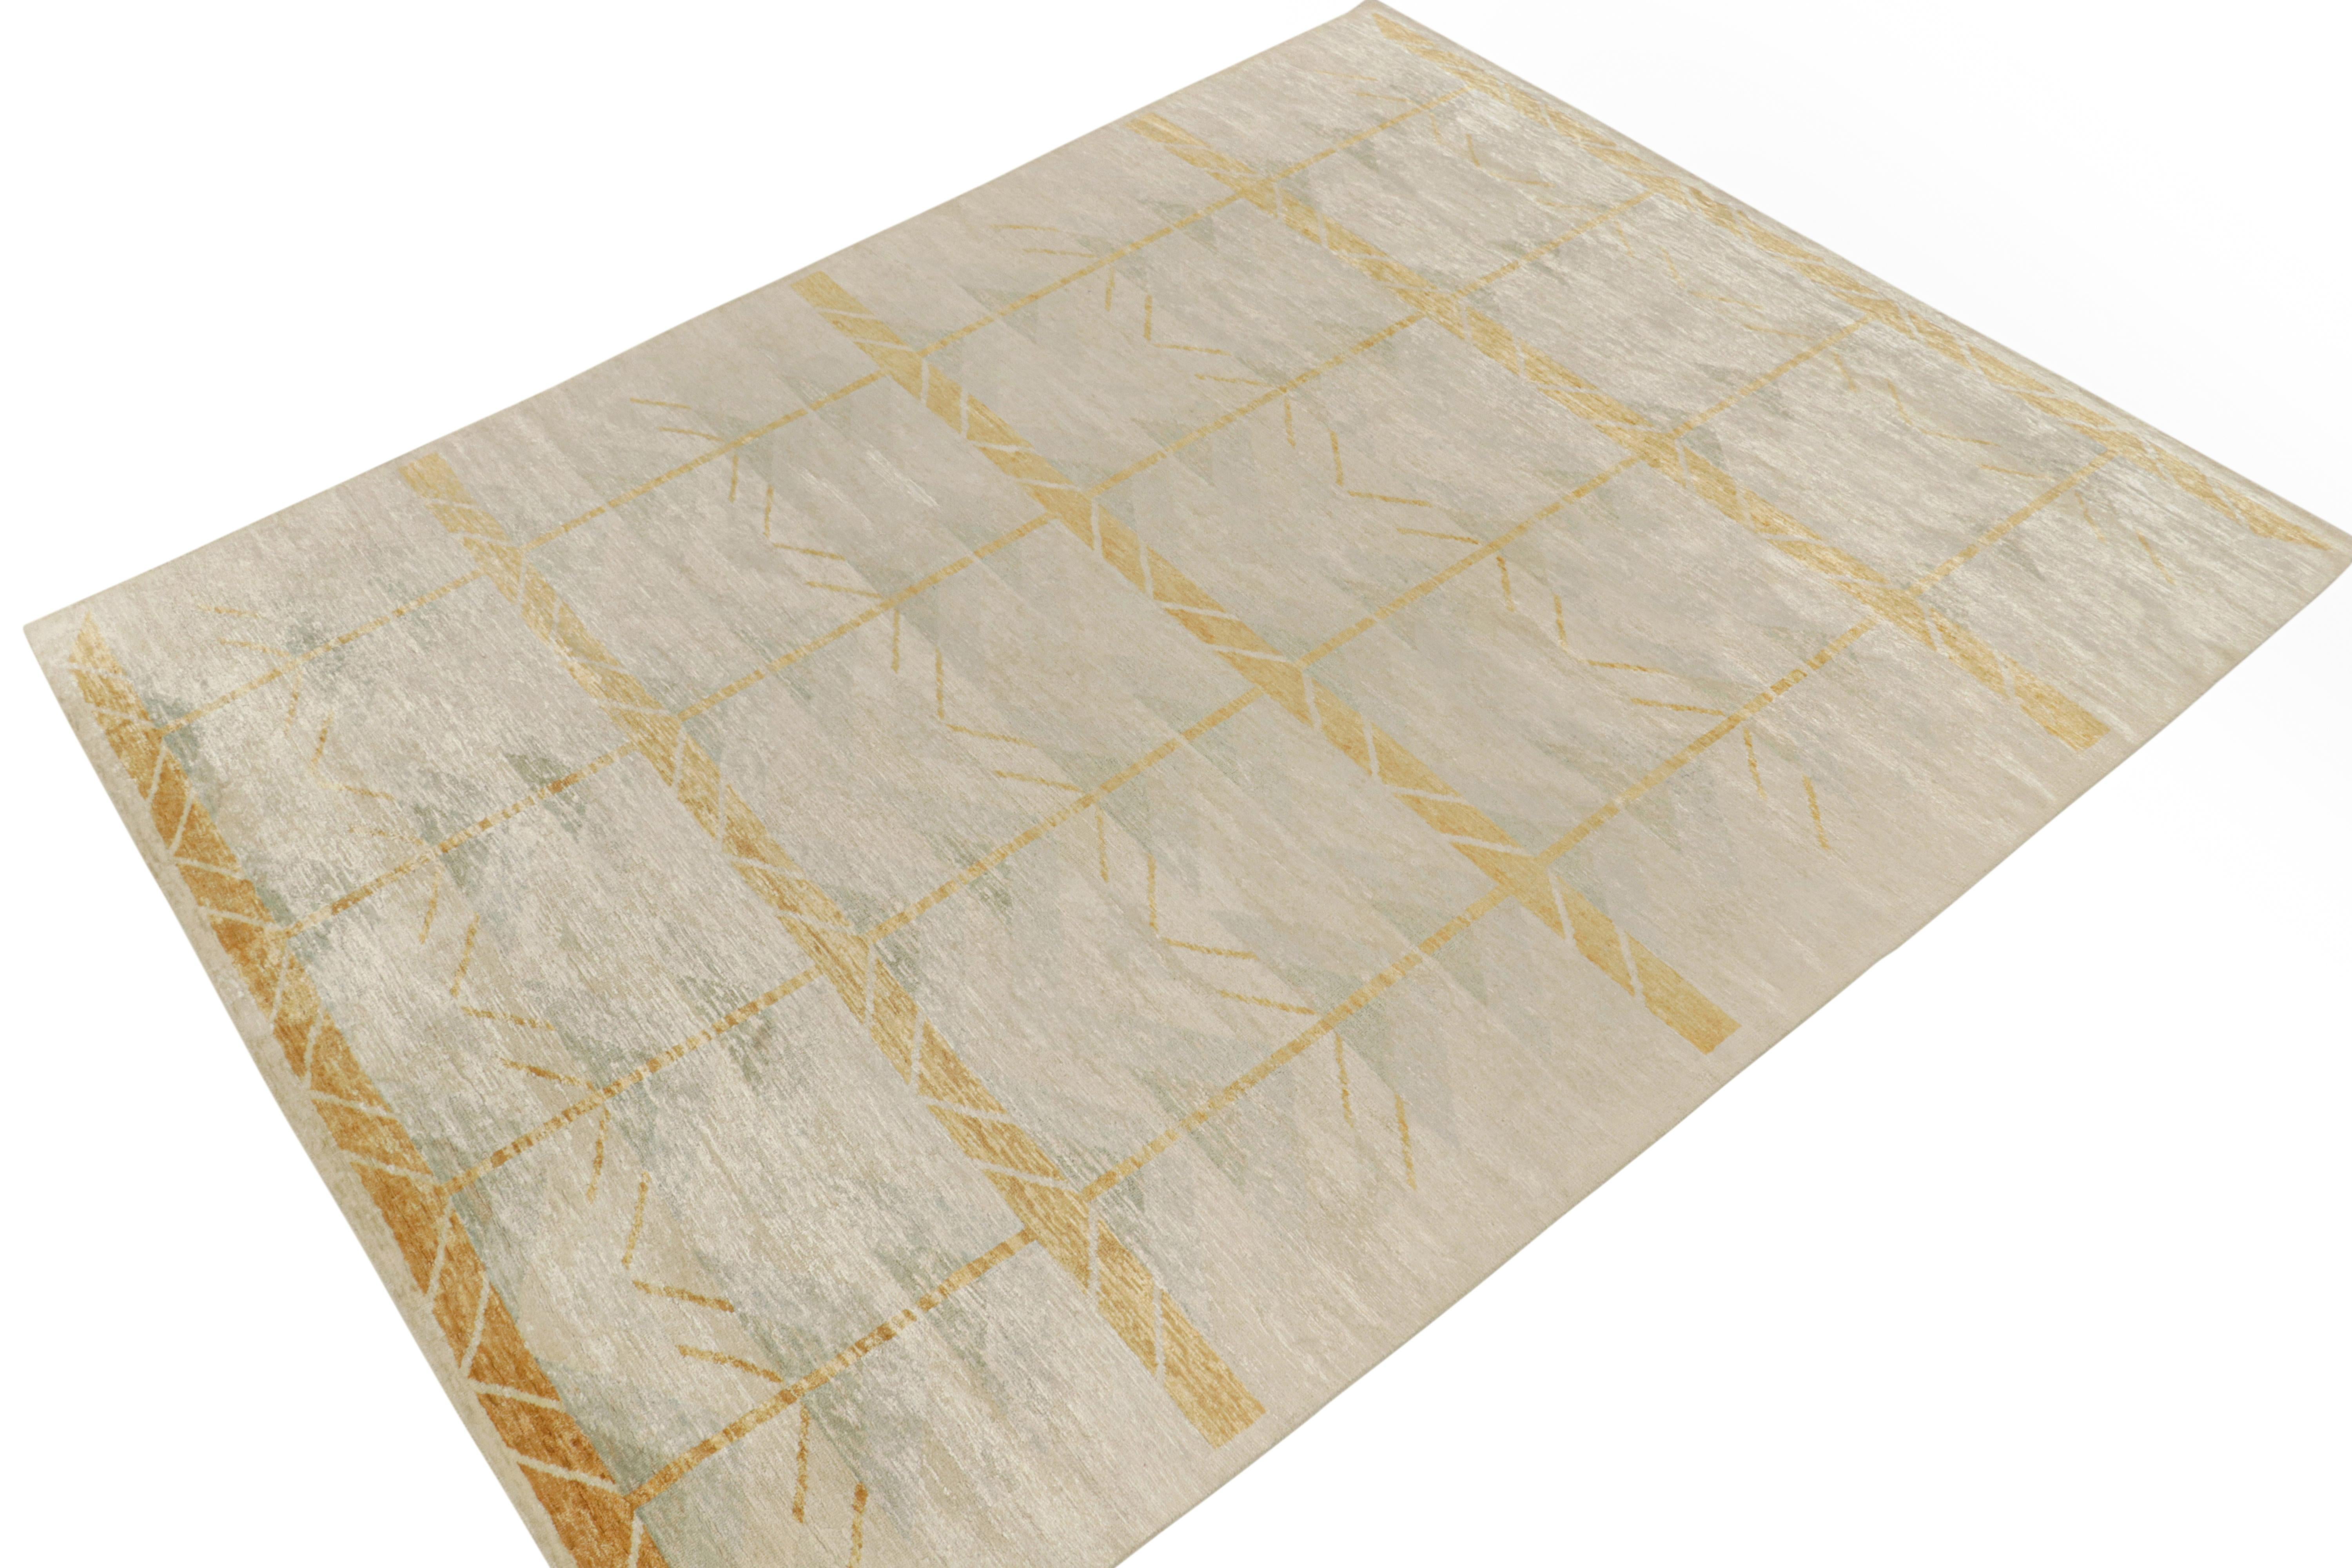 hand knotted in silk, from Rug & Kilim’s acclaimed Scandinavian rug collection reimagining the celebrated Mid-Century Modern style. 

This piece enjoys an experimental take on the Swedish Deco geometric pattern in luscious gray, blue and gold with